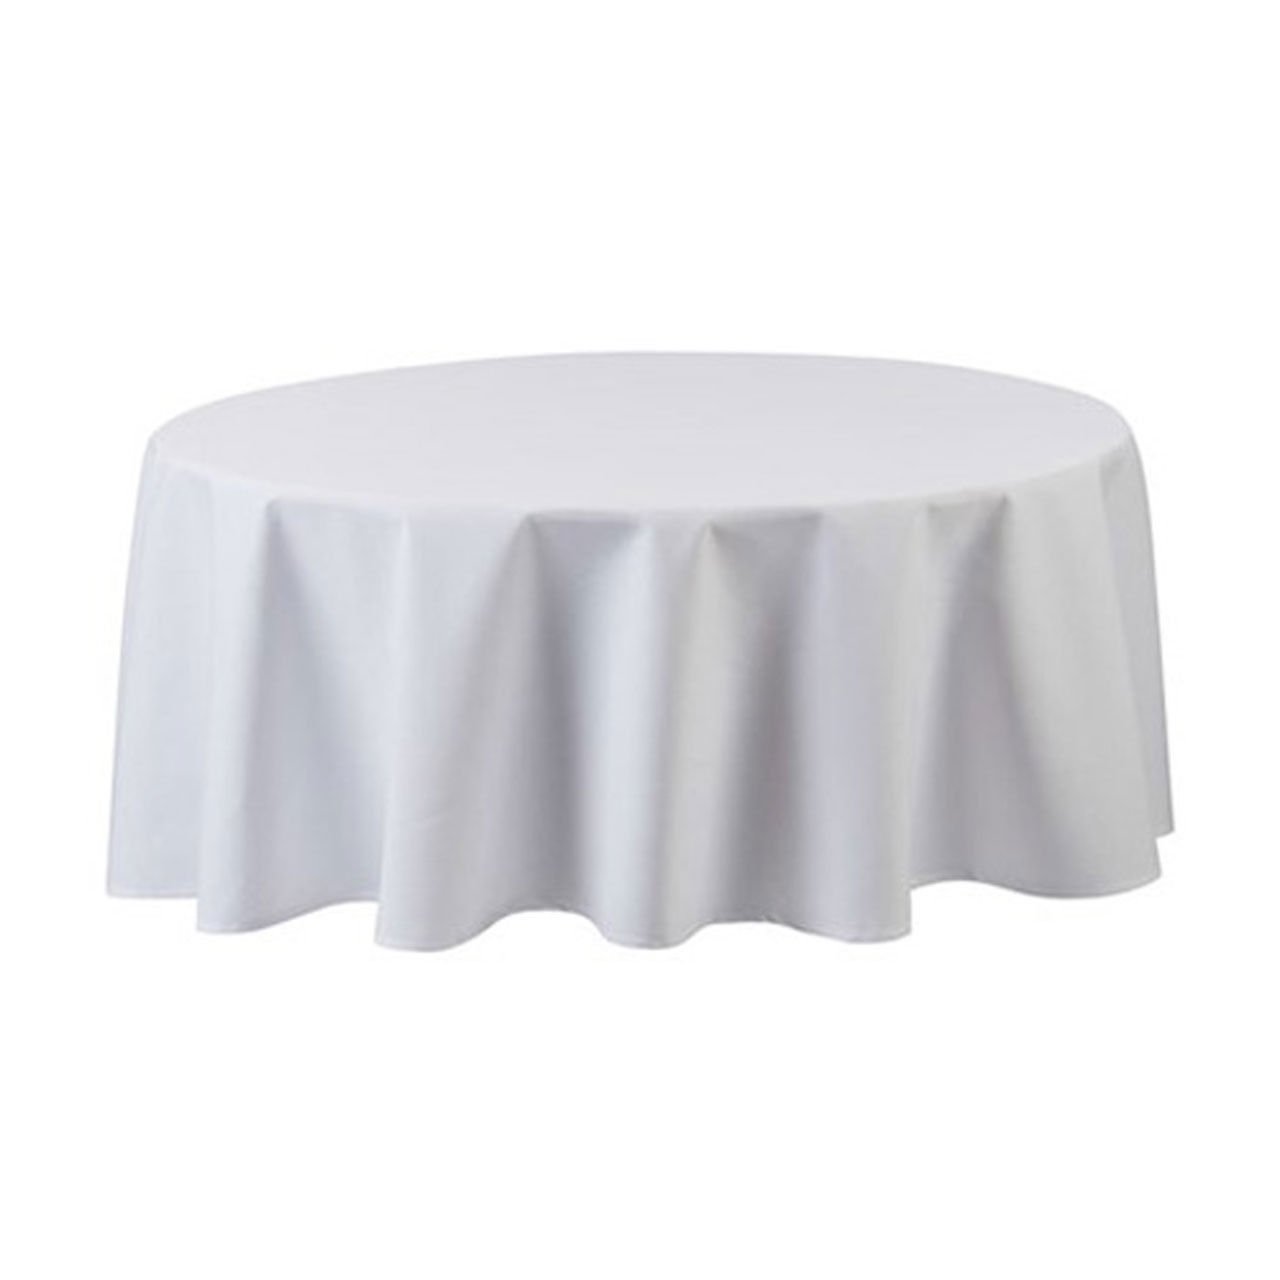 What is the weight of each square yard of the Seamless White 120" Round Tablecloth?